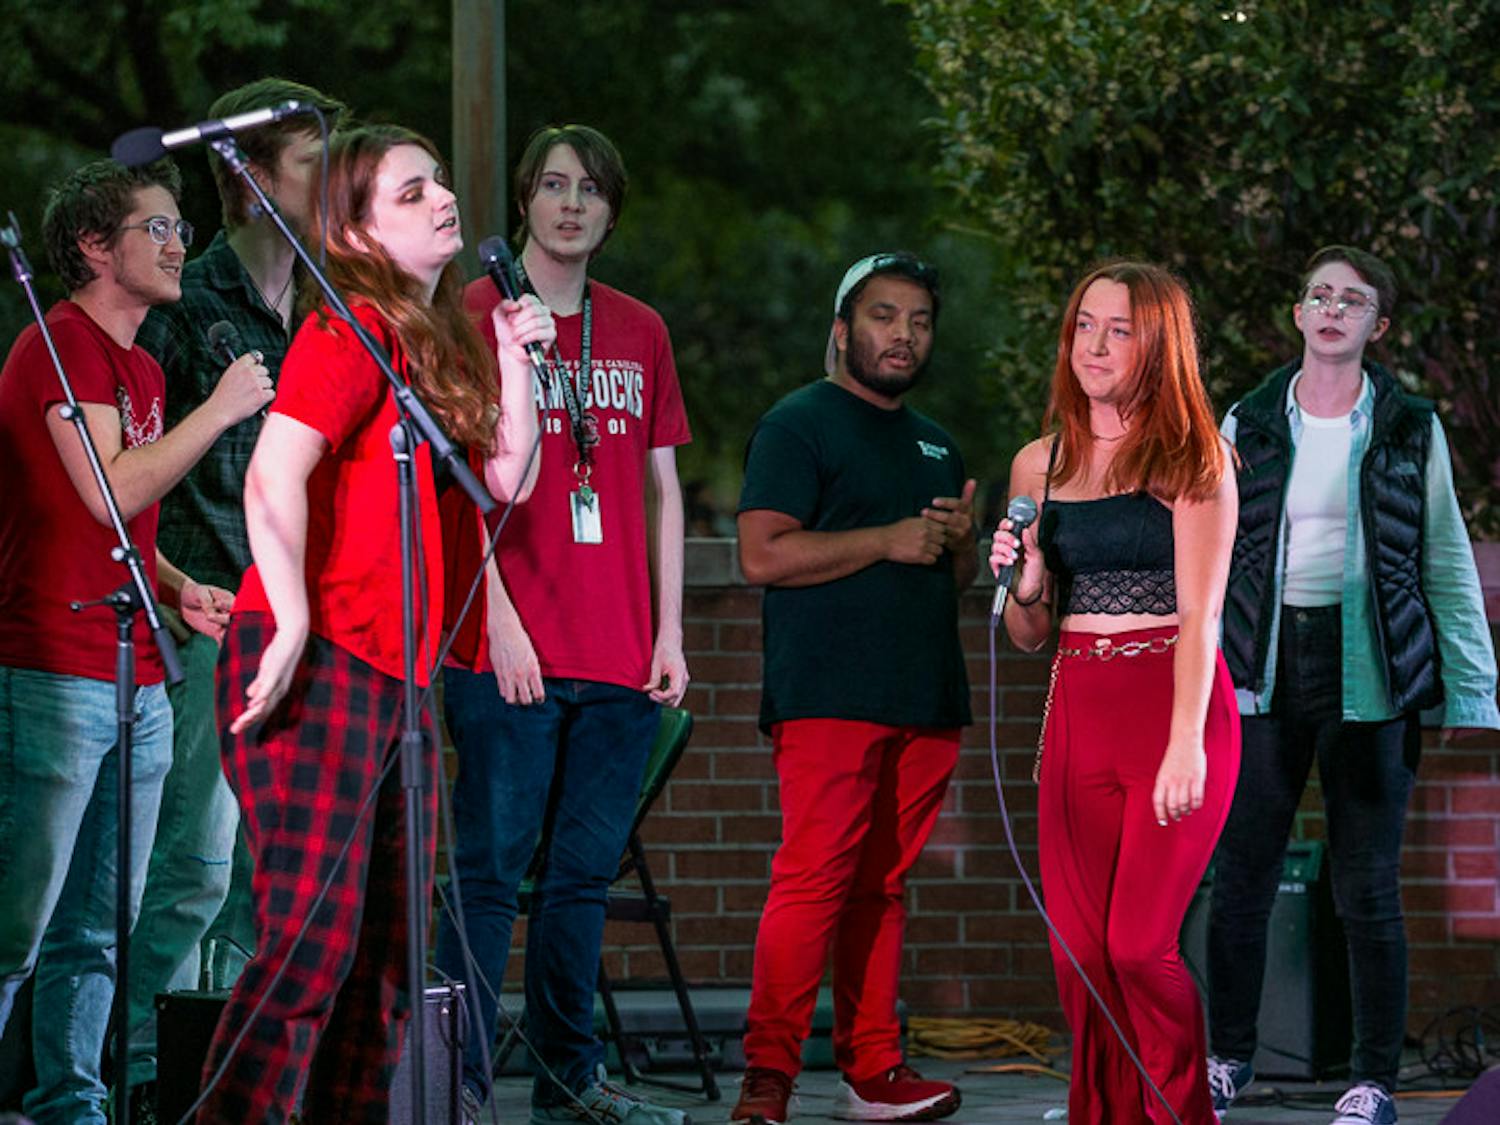 Third-year media arts student Alex Fossum (left) and third-year psychology student Erin McDonough (right) sing a duet during The Resonance's opening act on Oct. 5, 2022. The bands competed to be able to perform at the UofSC Homecoming Block Party on Oct. 28, 2022.